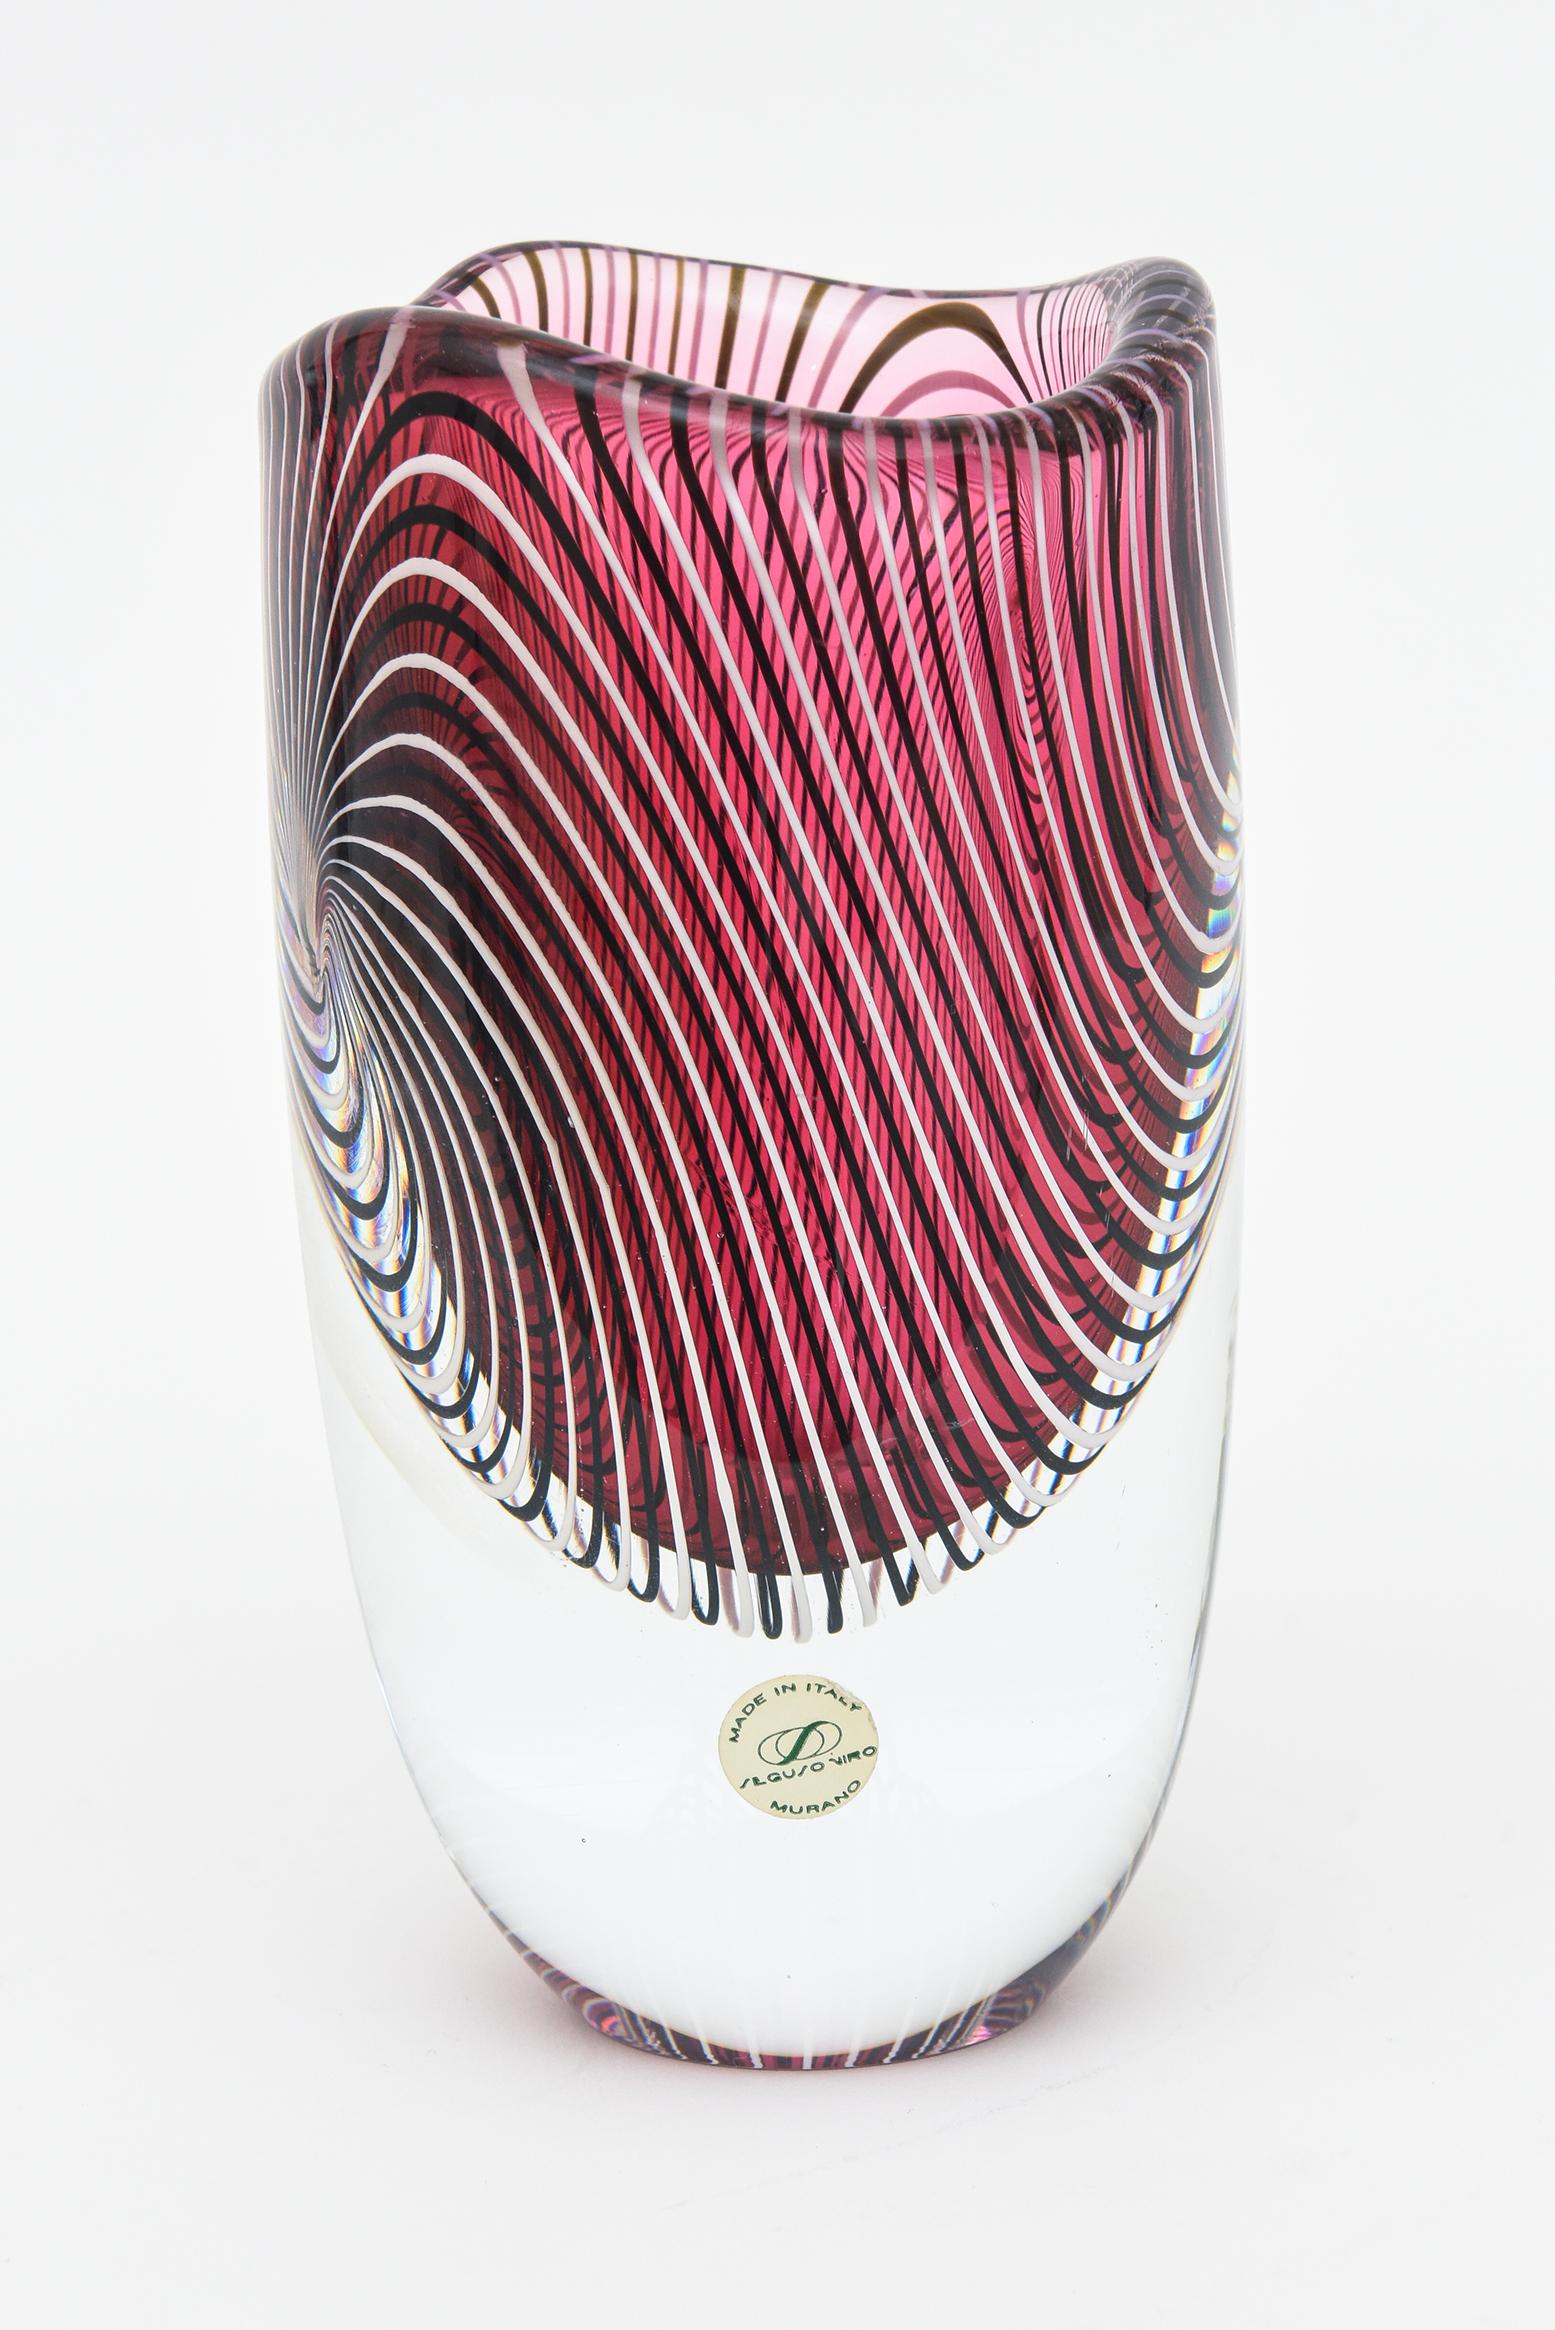 Vintage Murano Seguso Spiral Optic Striped Deep Pink And White Vase or Vessel In Good Condition For Sale In North Miami, FL